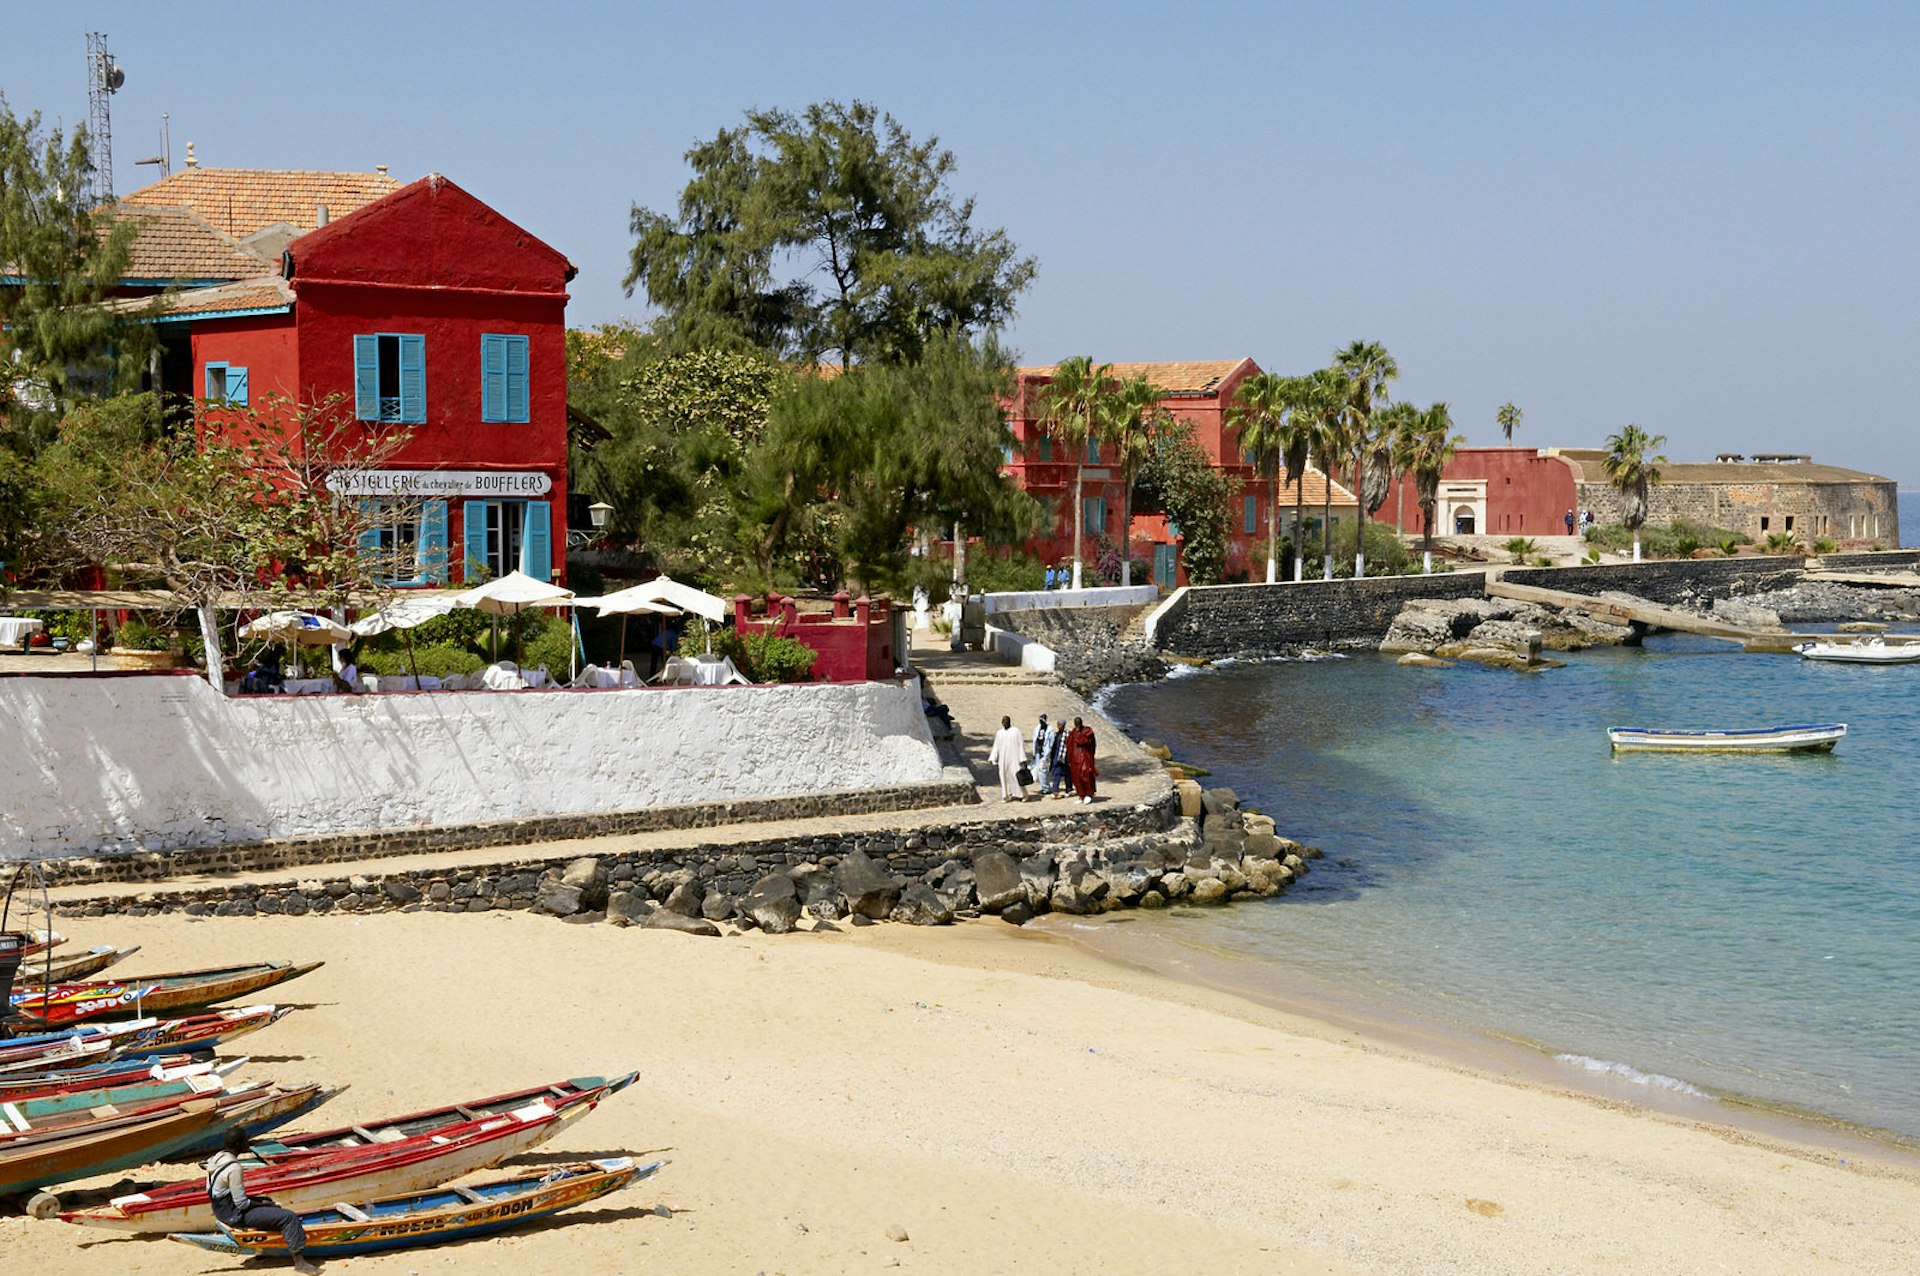 Looking out from the beach on Gorée to the sea, the left side of the image has a couple of traditional piroques on the sand, which are backed by bright red historical buildings (two storeys) and trees © Tuul & Bruno Morandi / Getty Images